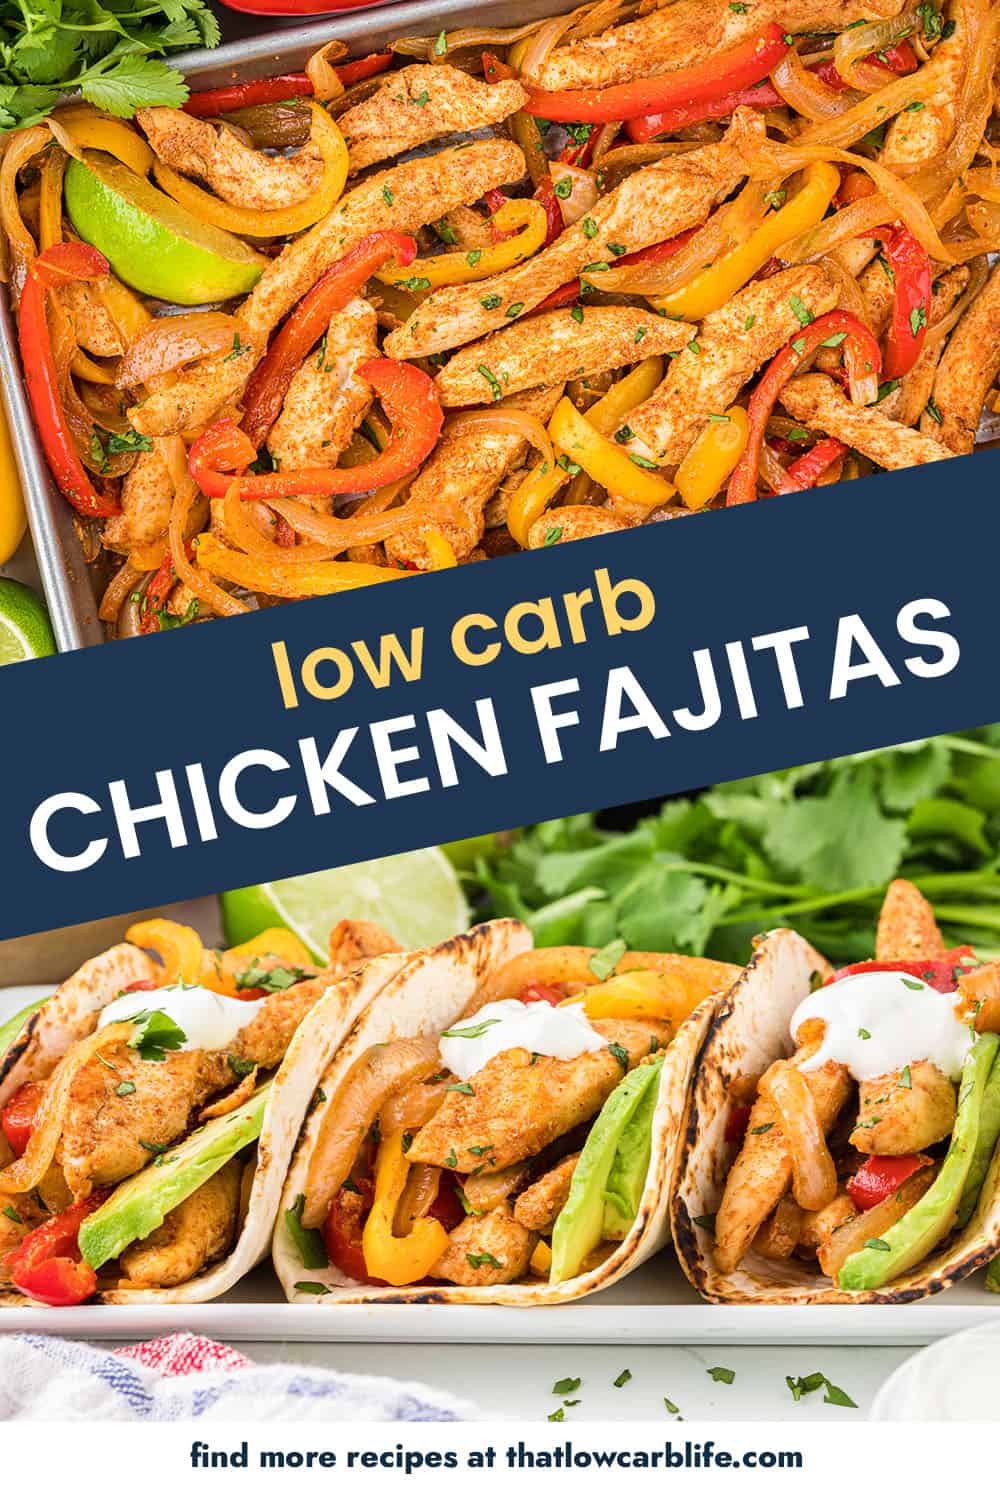 Collage of chicken fajitas images.